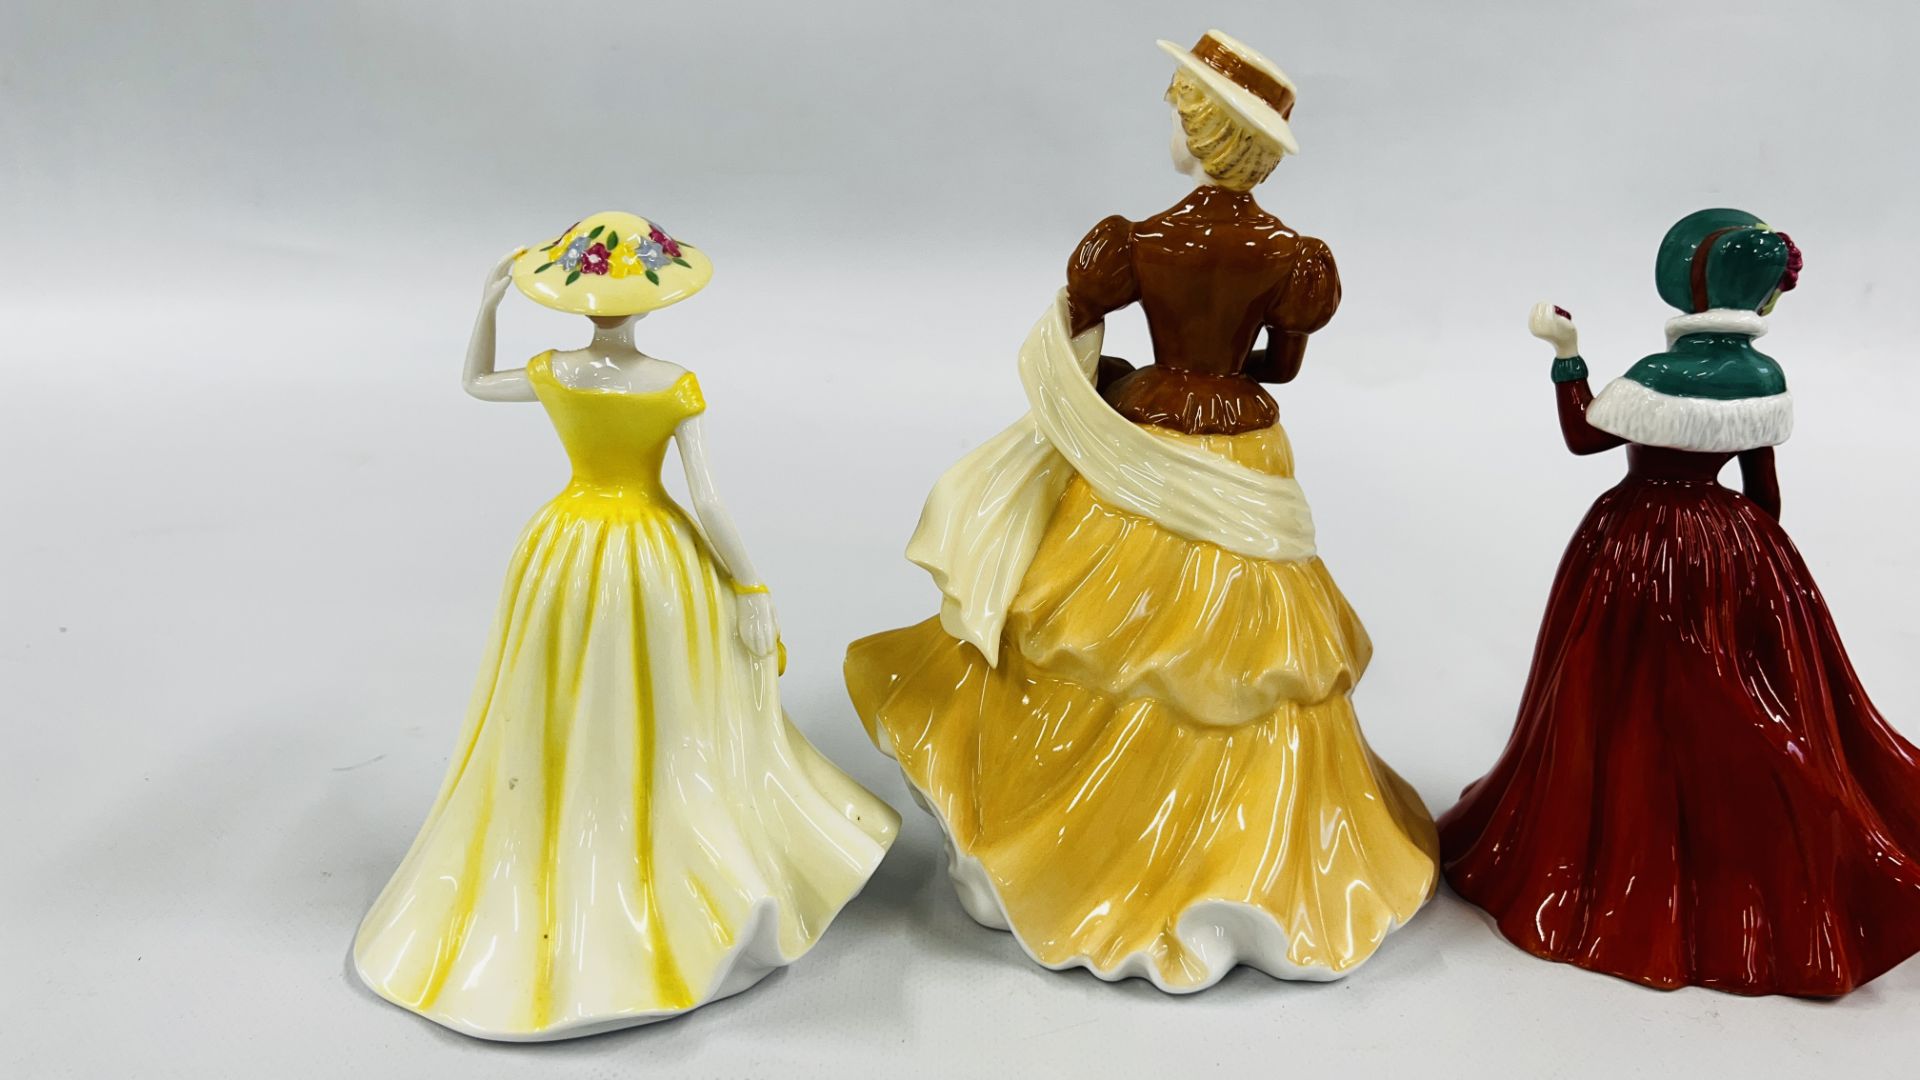 3 ROYAL DOULTON CABINET COLLECTORS FIGURES TO INCLUDE "SUMMER BREEZE" HN 4587, - Image 6 of 9